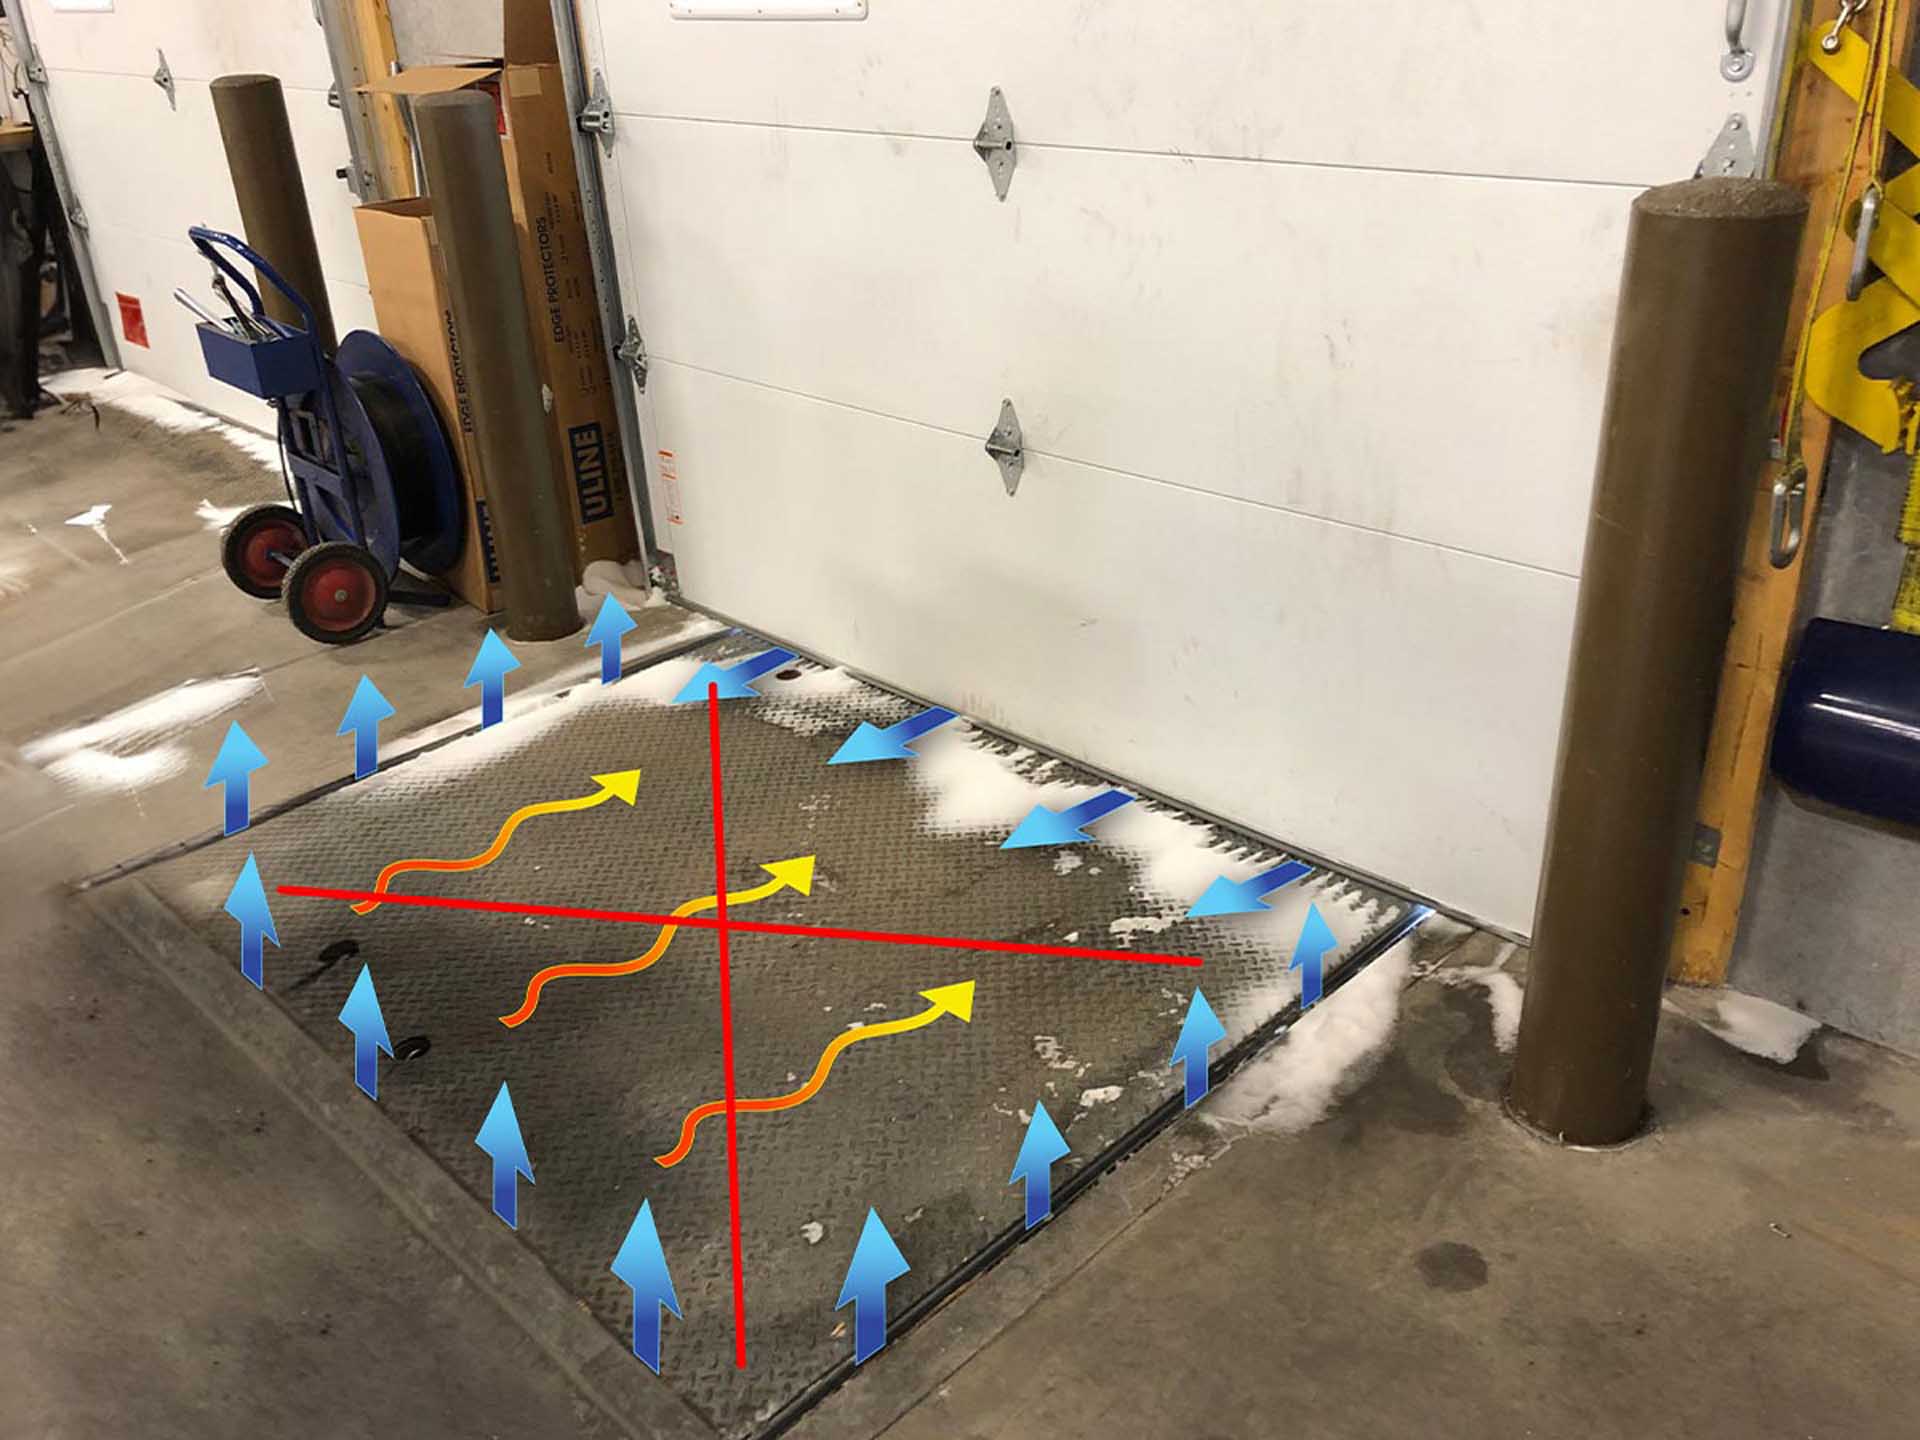 Pit-style dock leveler with snow and cold coming in through the gaps